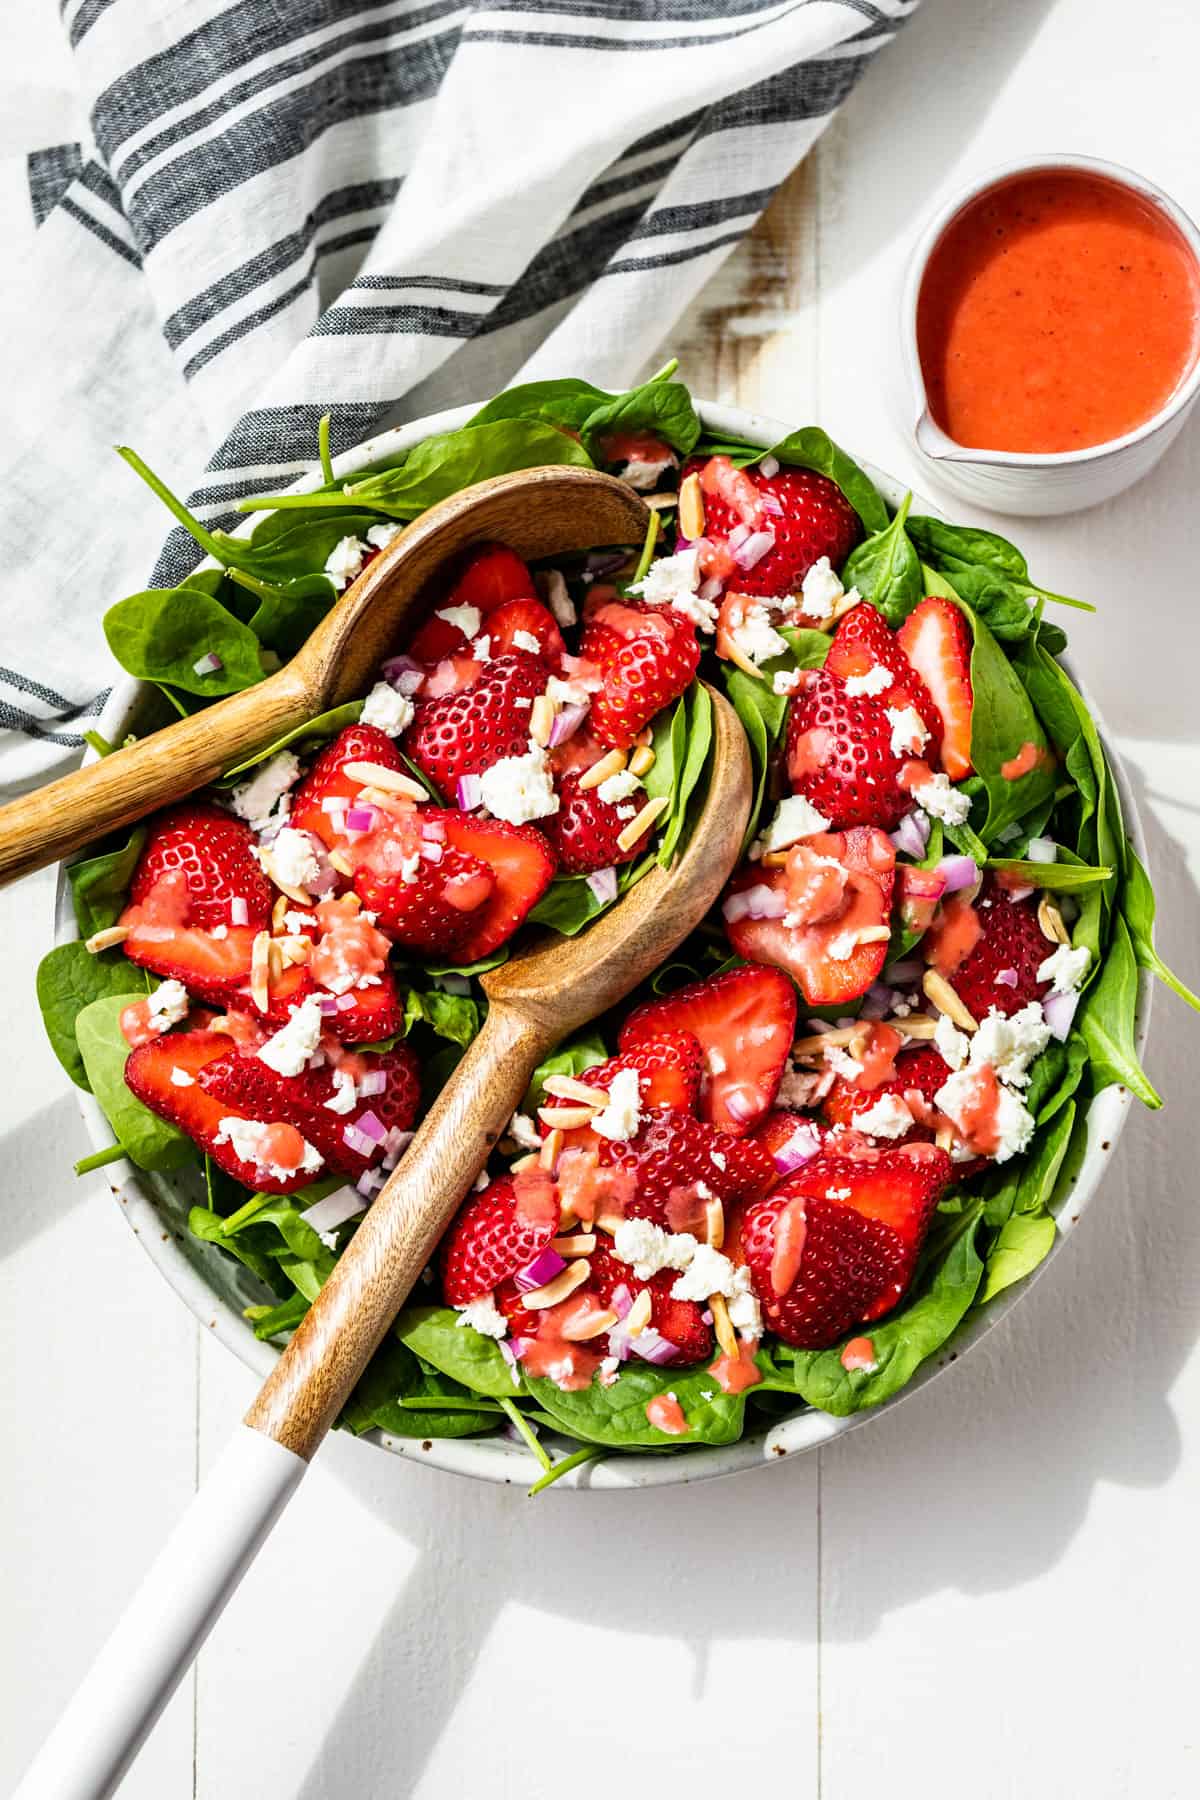 A further out view of the whole Strawberry Spinach Salad in a white bowl with white handled wooden serving spoons, a blue and white striped linen and strawberry vinaigrette on the side.